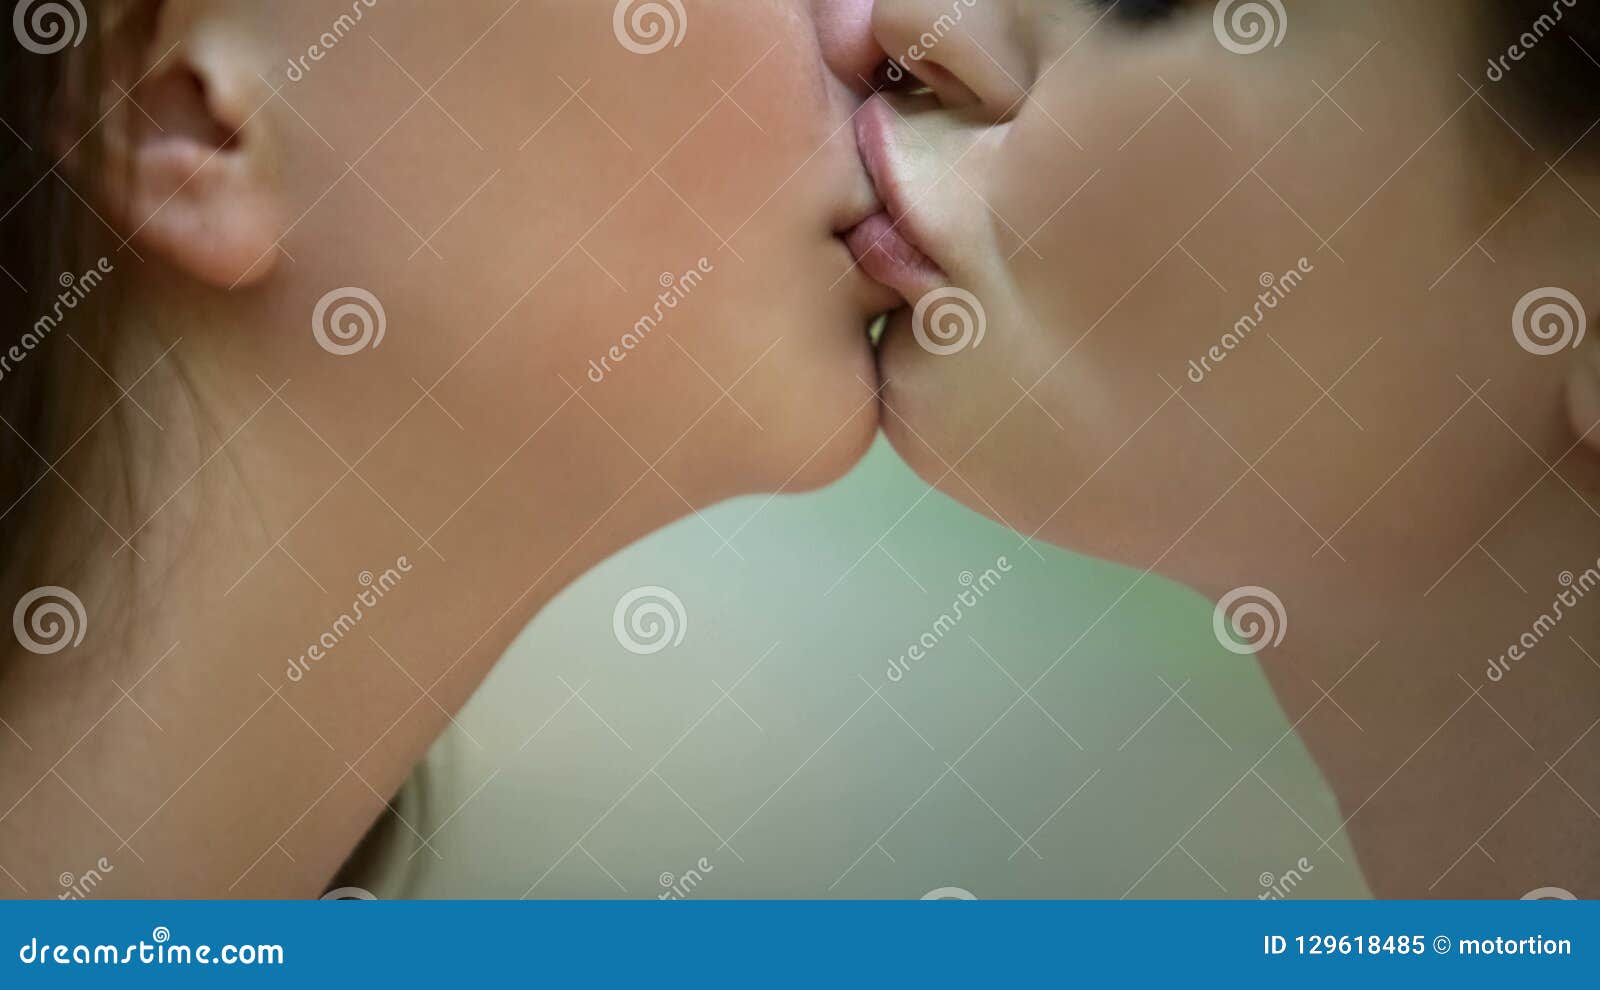 andy llewellyn recommends Passionate Lesbian Kissing